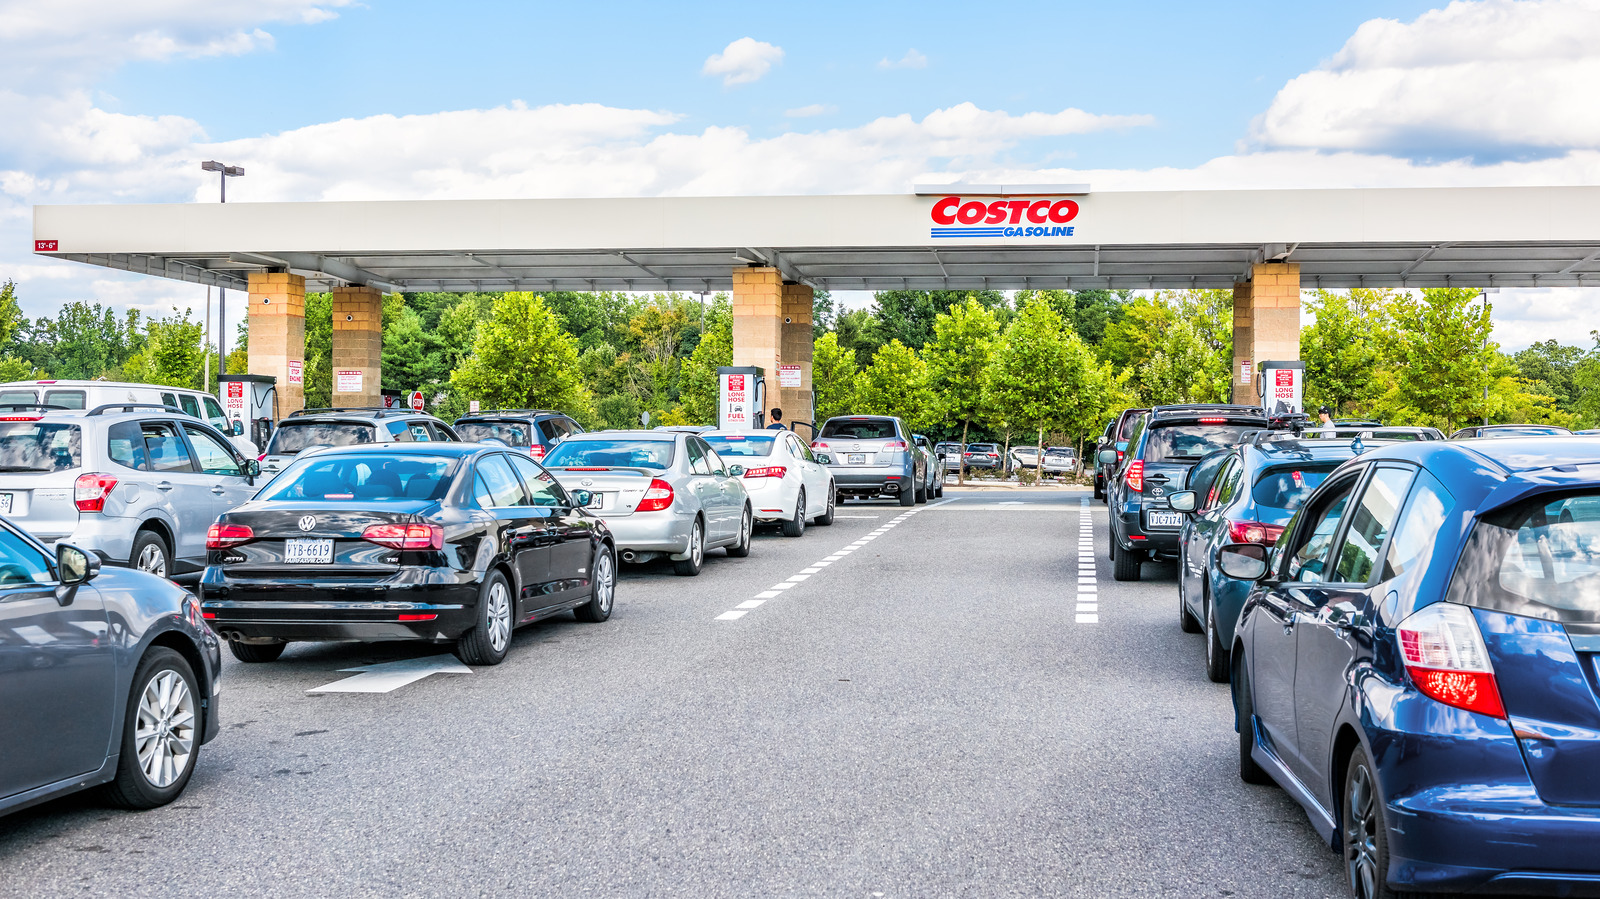 8. "Costco Gas Discount" - A thread on Reddit where users share tips for getting discounted gas at Costco - wide 8